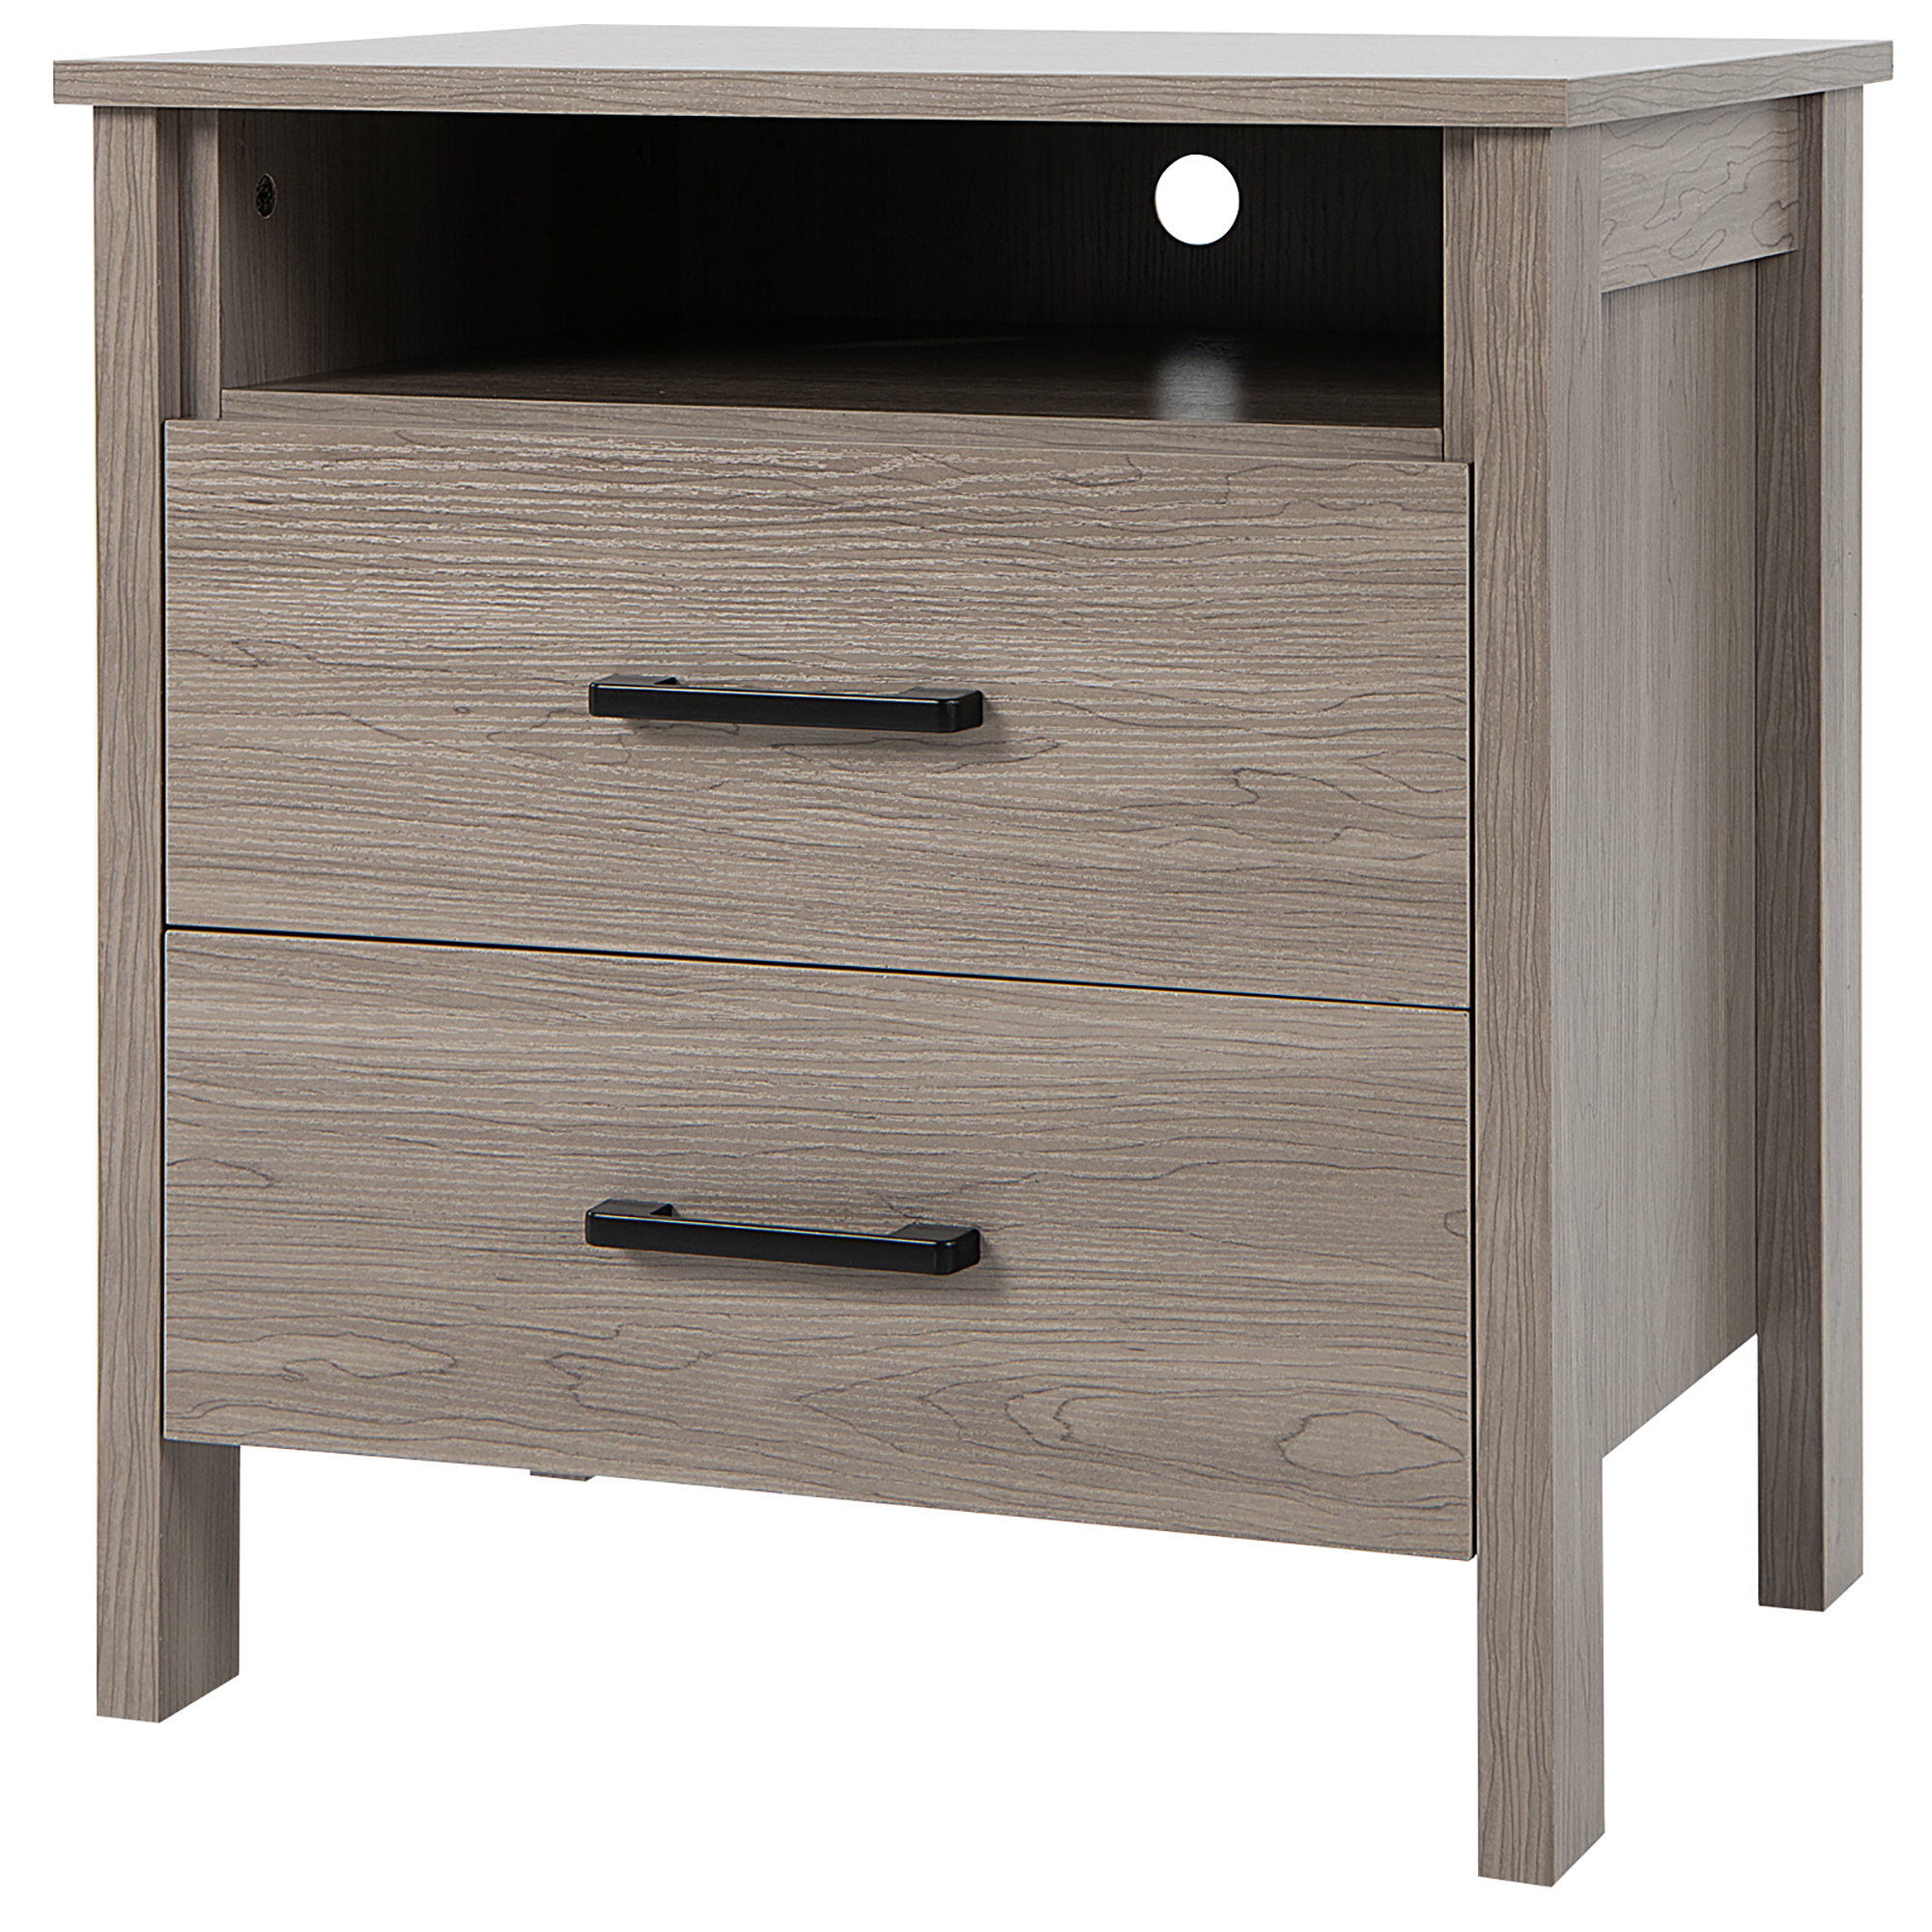 Costway Nightstand Drawers Rustic Side End Table Storage Compartment Cable Hole Oak - image 1 of 8